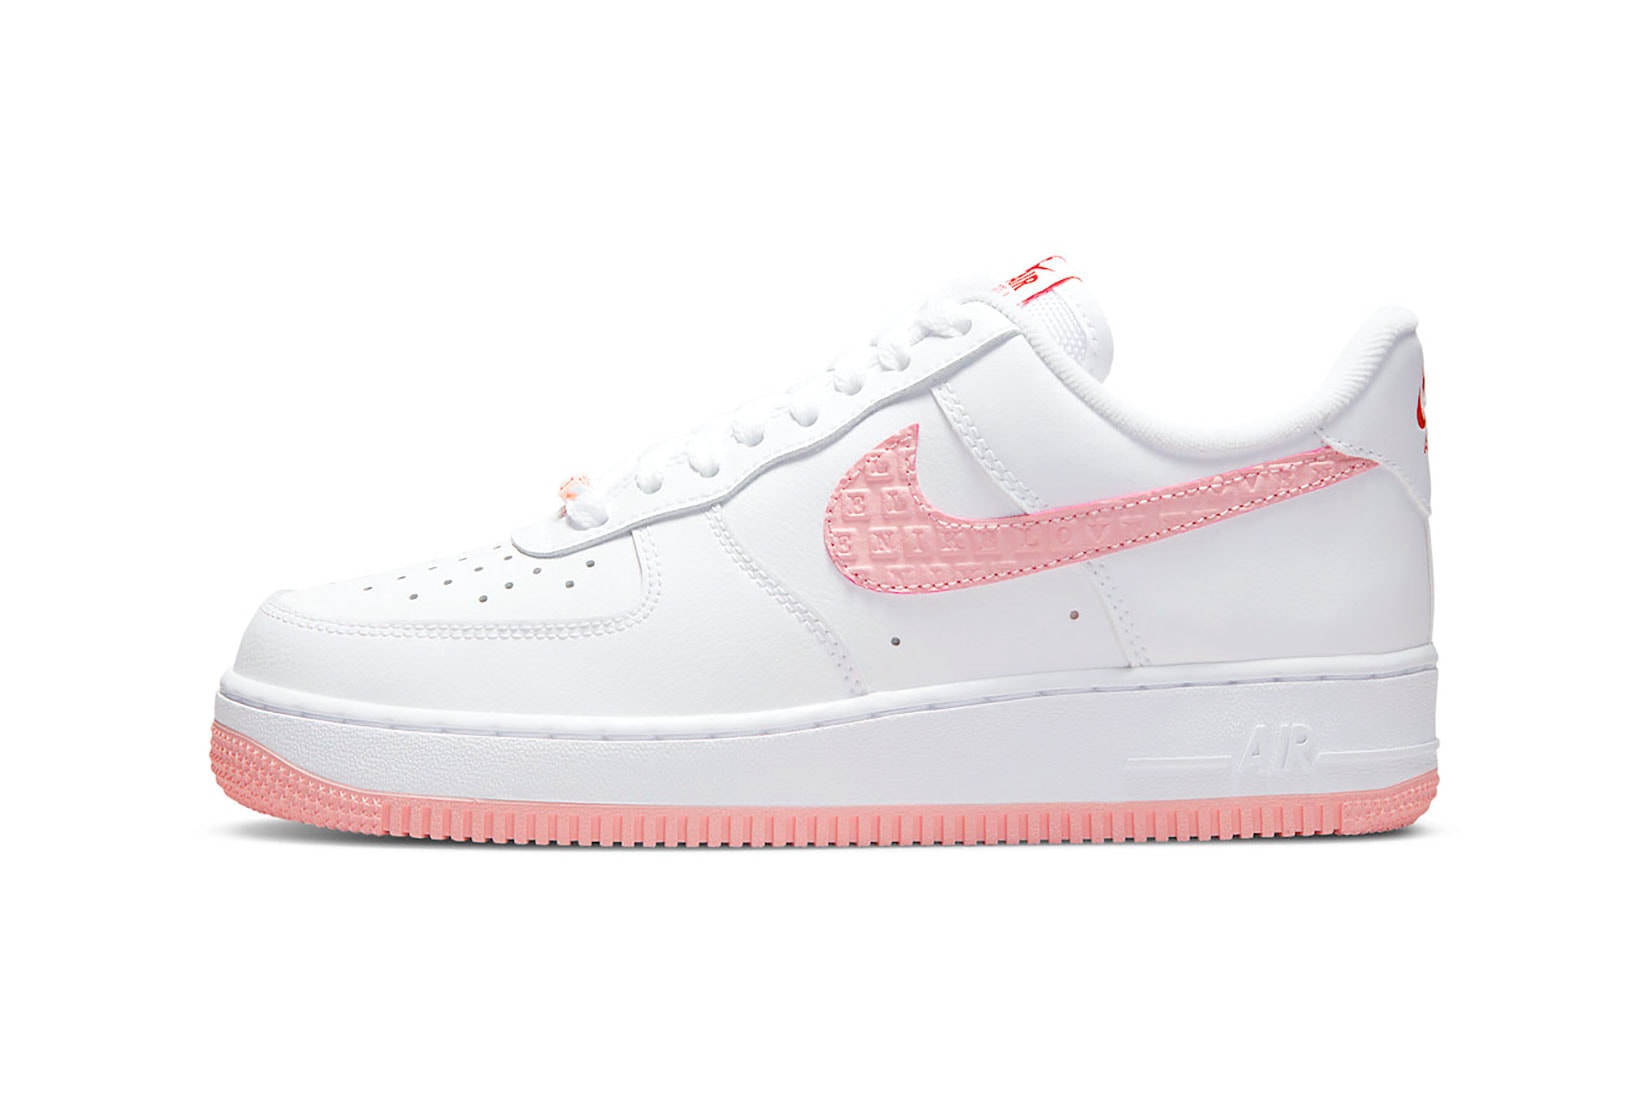 Nike Valentine’s Day Air Force 1 AF1 2022 Sneakers White Pink Red Footwear Shoes Kicks